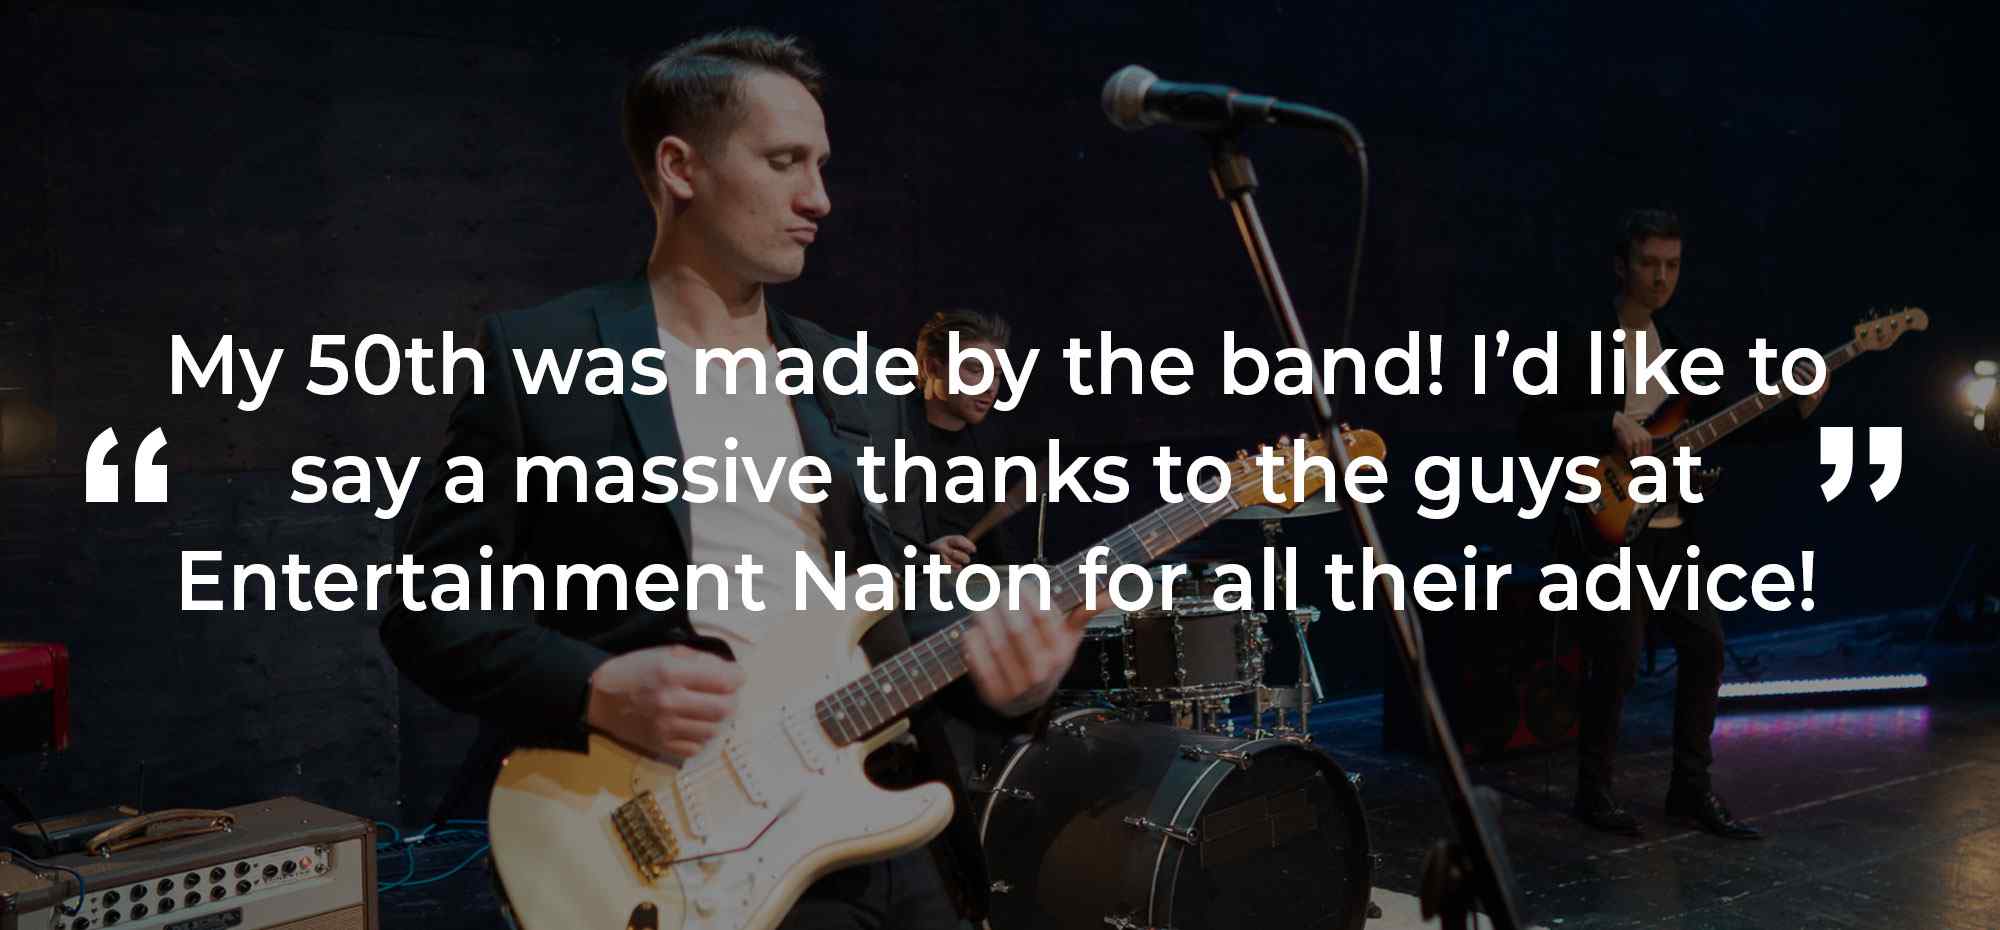 Client Review of a Party Band Derbyshire